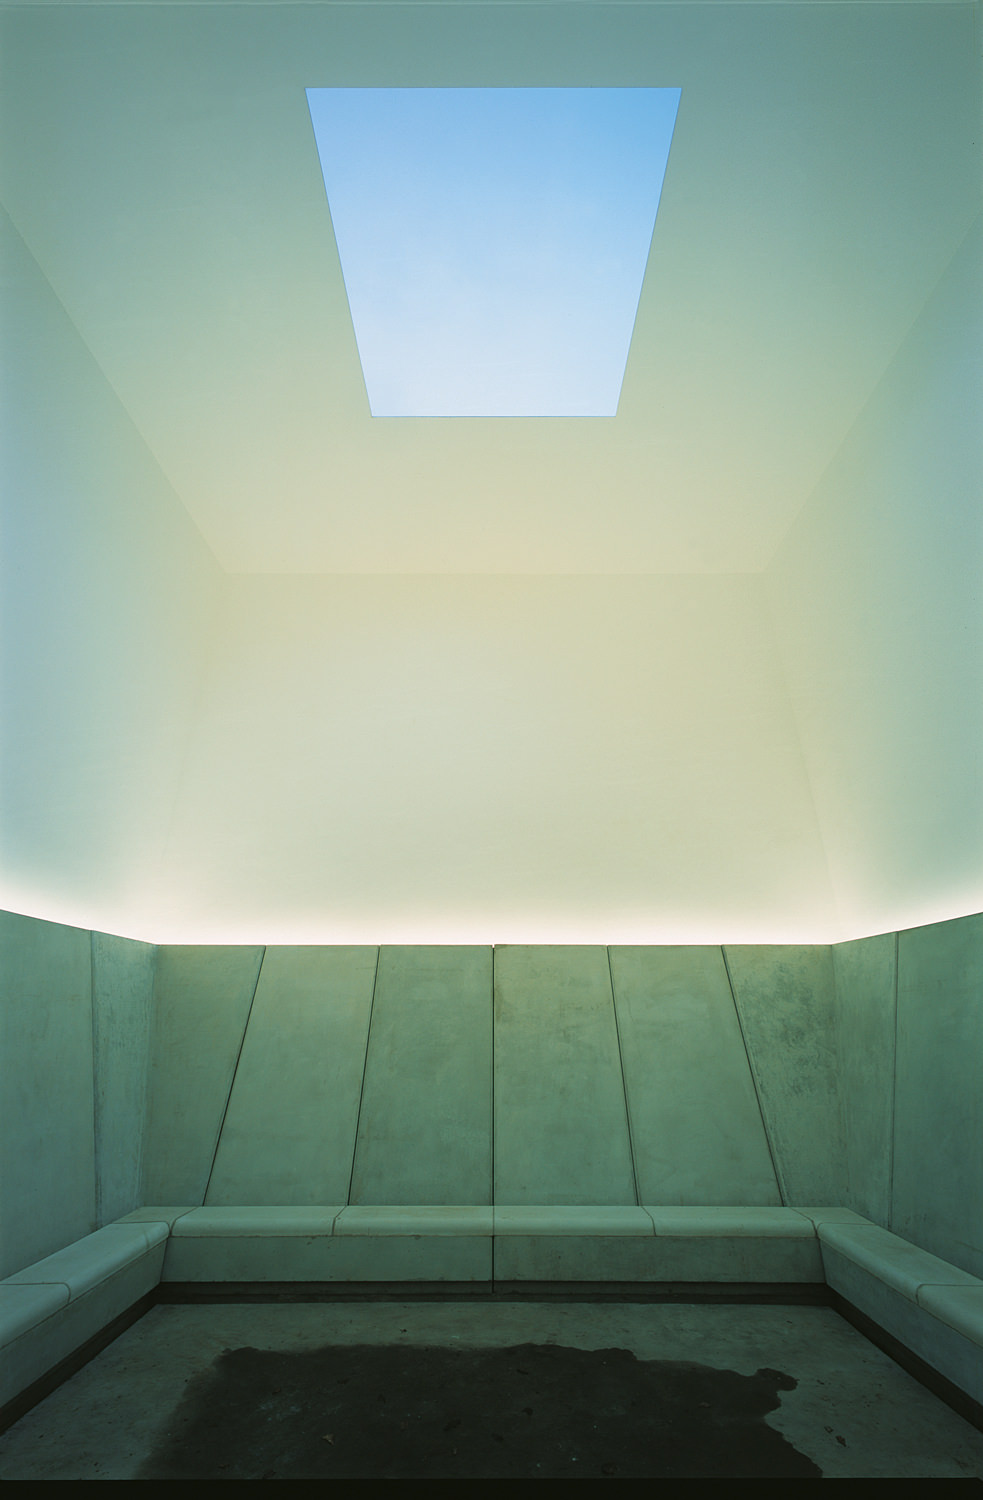 A room with concrete bench seating and a square hole cut into the ceiling revealing the sky